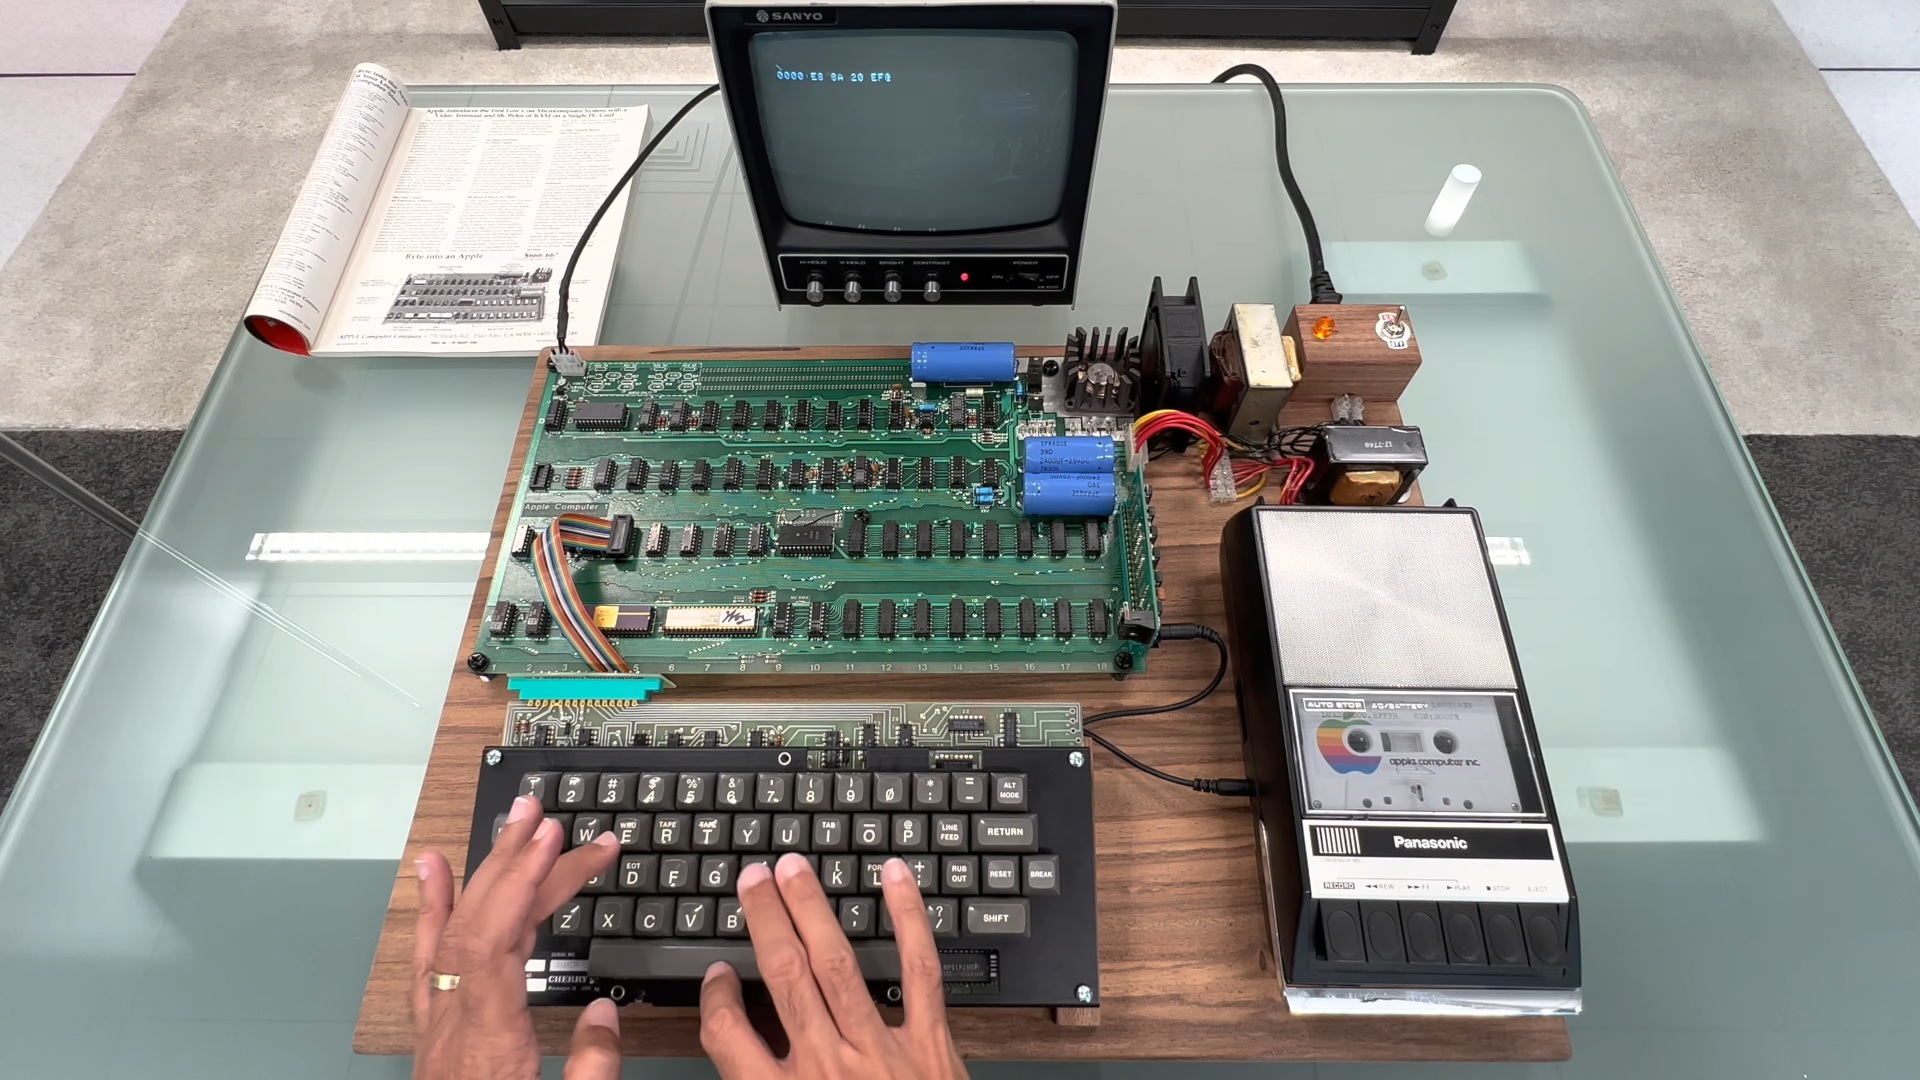 This legendary Apple computer may possibly value up to $500,000